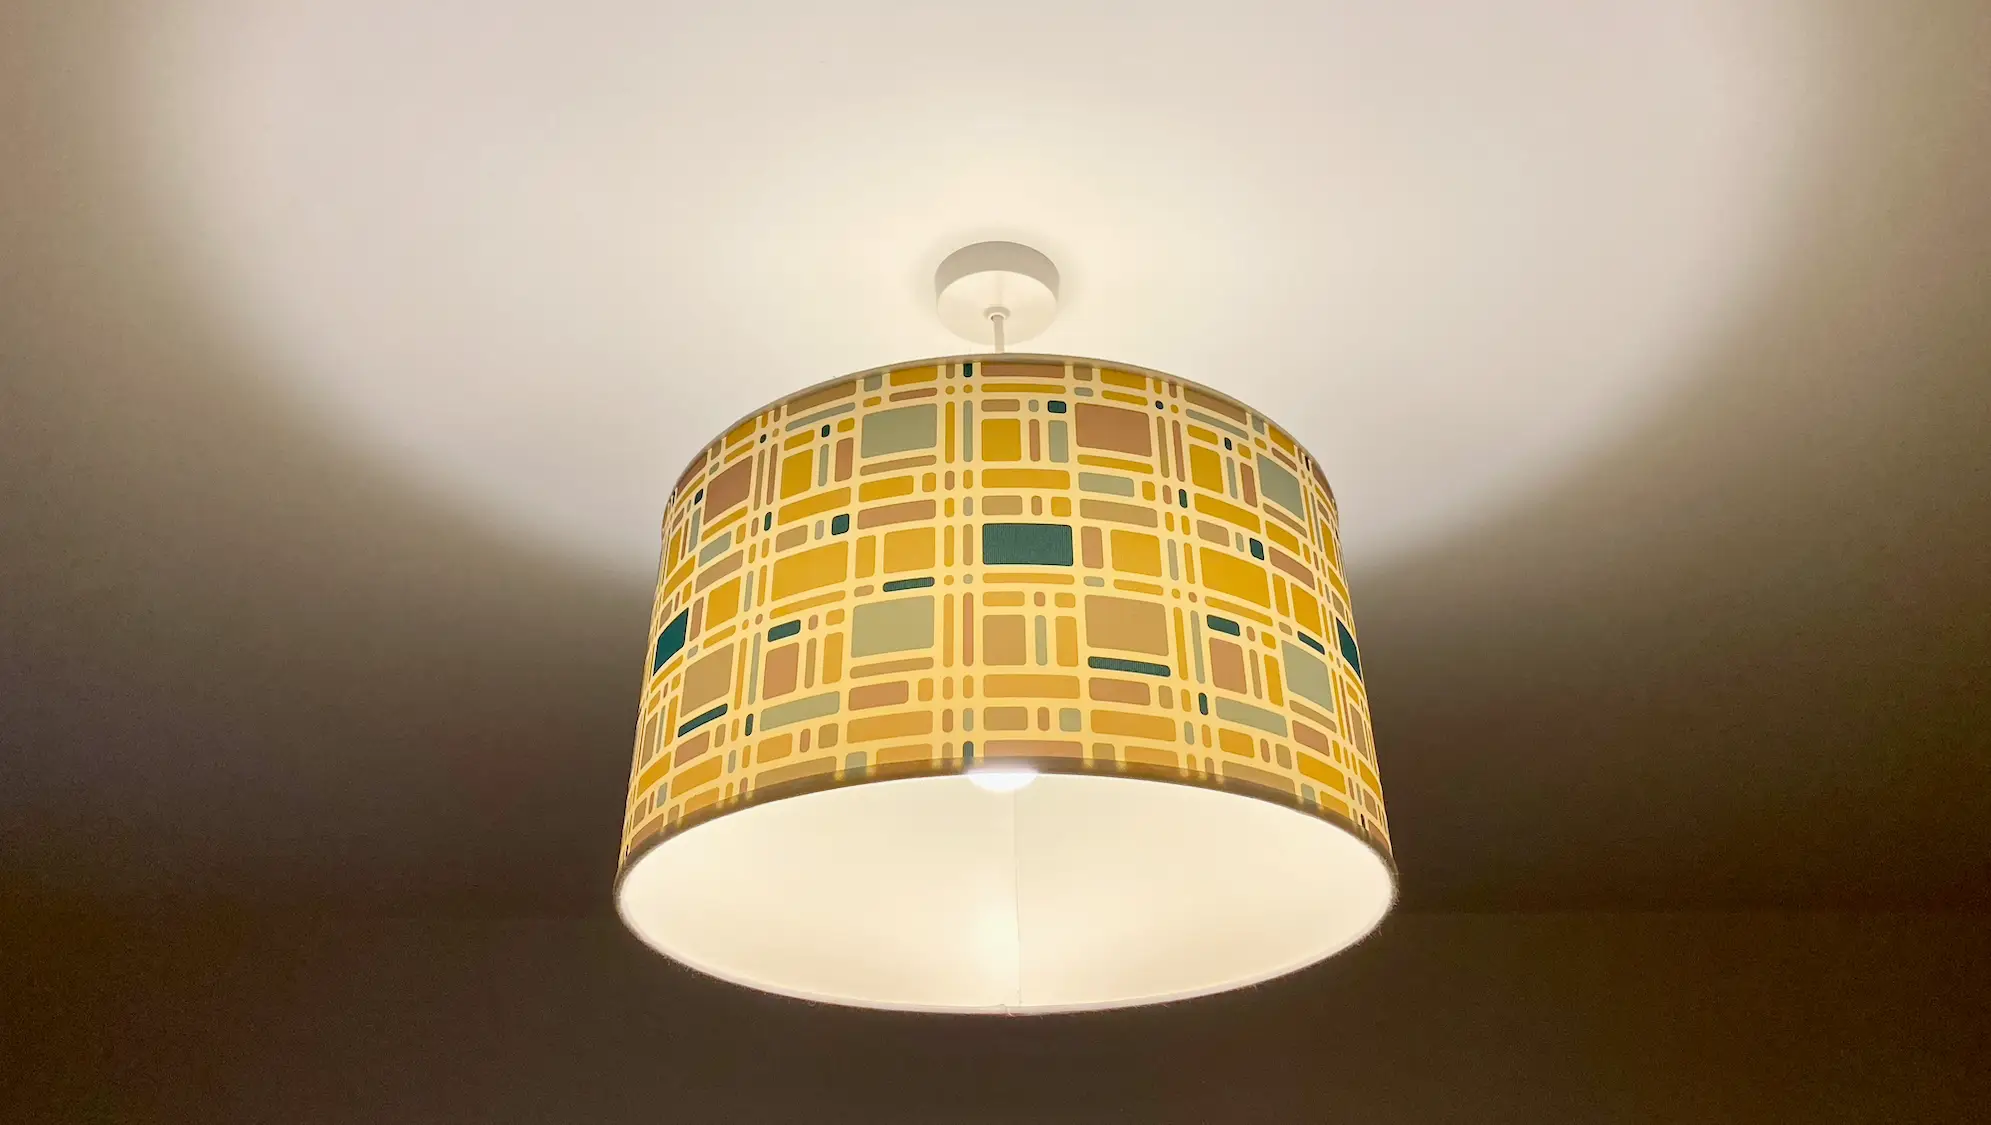 Cost to install or fix a light fitting fixture